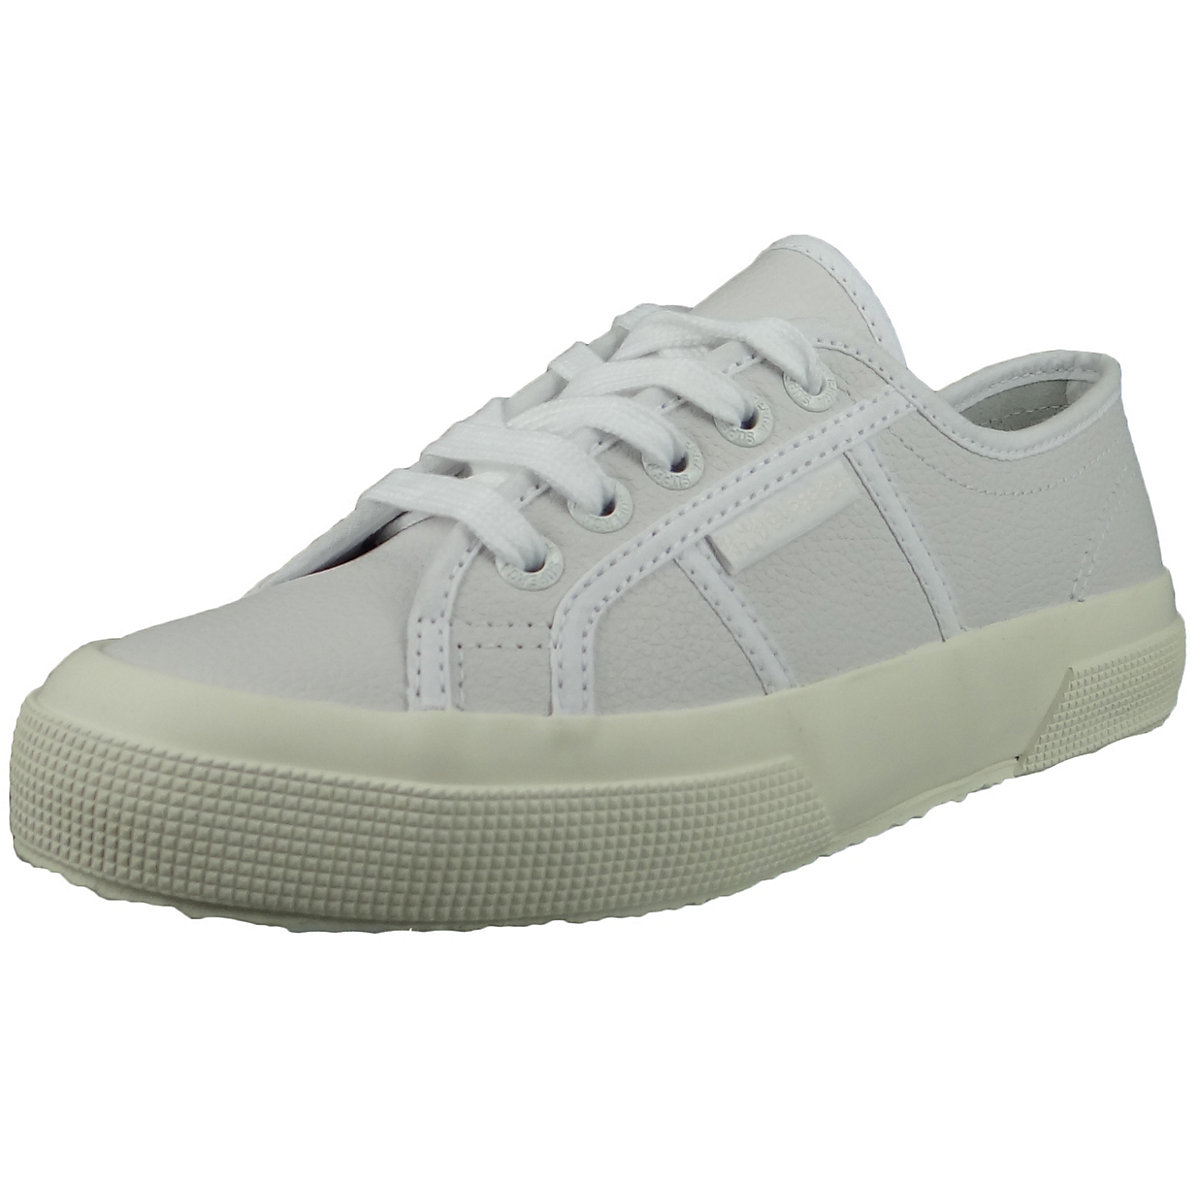 Superga® Damen Low Sneaker 2750 Tumbled Leather Low Top S009VH0 Weiß ADH opitcal white Leder Sneakers Low weiß